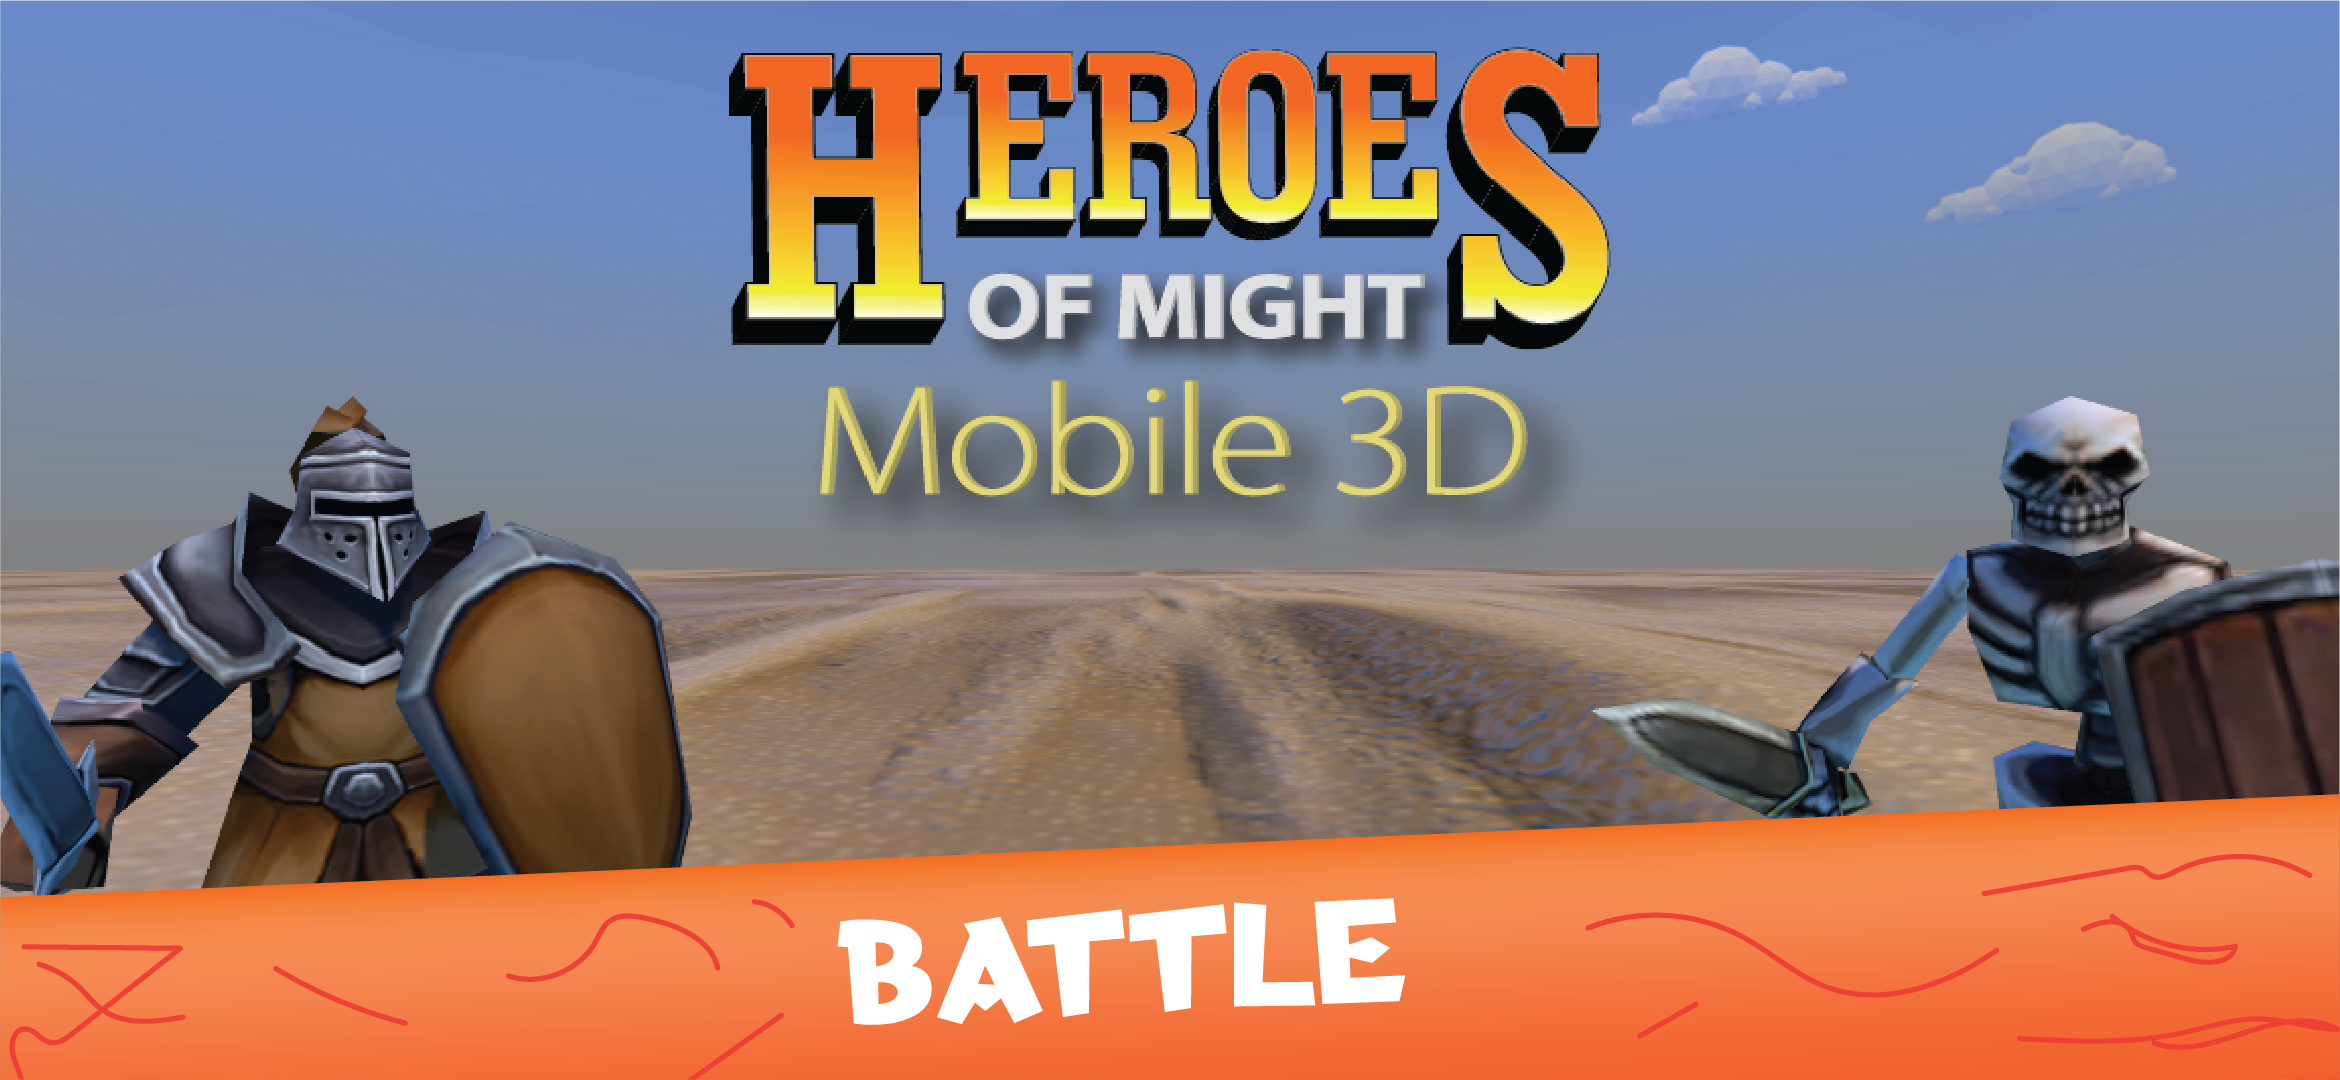 Heroes of Might Mobile 3D遊戲截圖